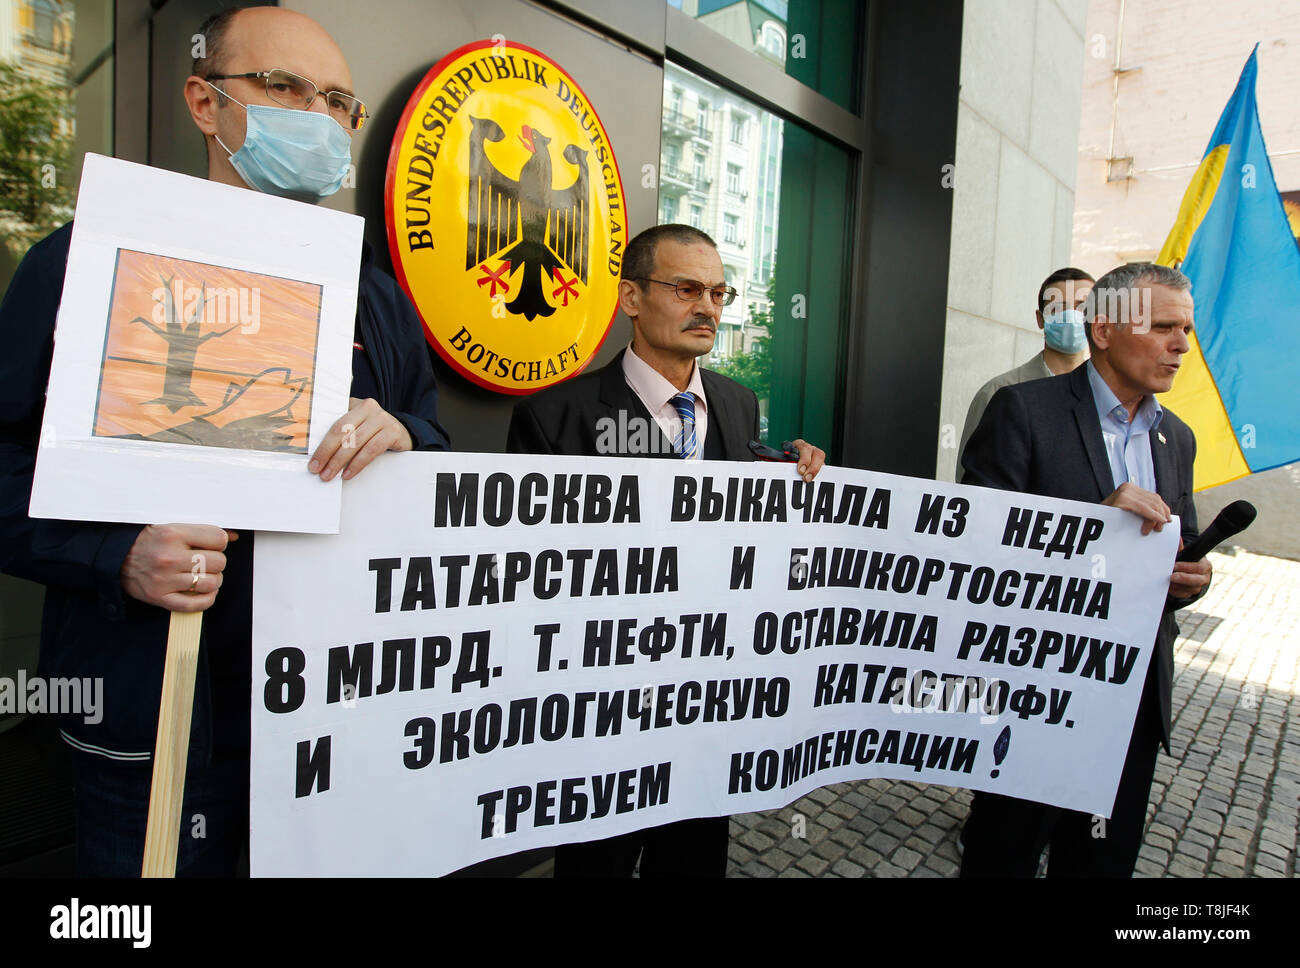 Protesters are seen holding a banner saying Moscow pumped 8 billion tons of oil from the depths of Tatarstan and Bashkortostan, leaving devastation and environmental disaster during the demonstration. The protest due with reports of pollution of the Russian export oil 'Urals' and high content of organic chloride compounds in it and the demand to initiate an independent international audit of Russian oil production and the Russian Transneft, as well as export-oriented Russian companies Rosneft, Tatneft and Bashneft, the protest was held in front of the German Embassy due to the fact that German Stock Photo